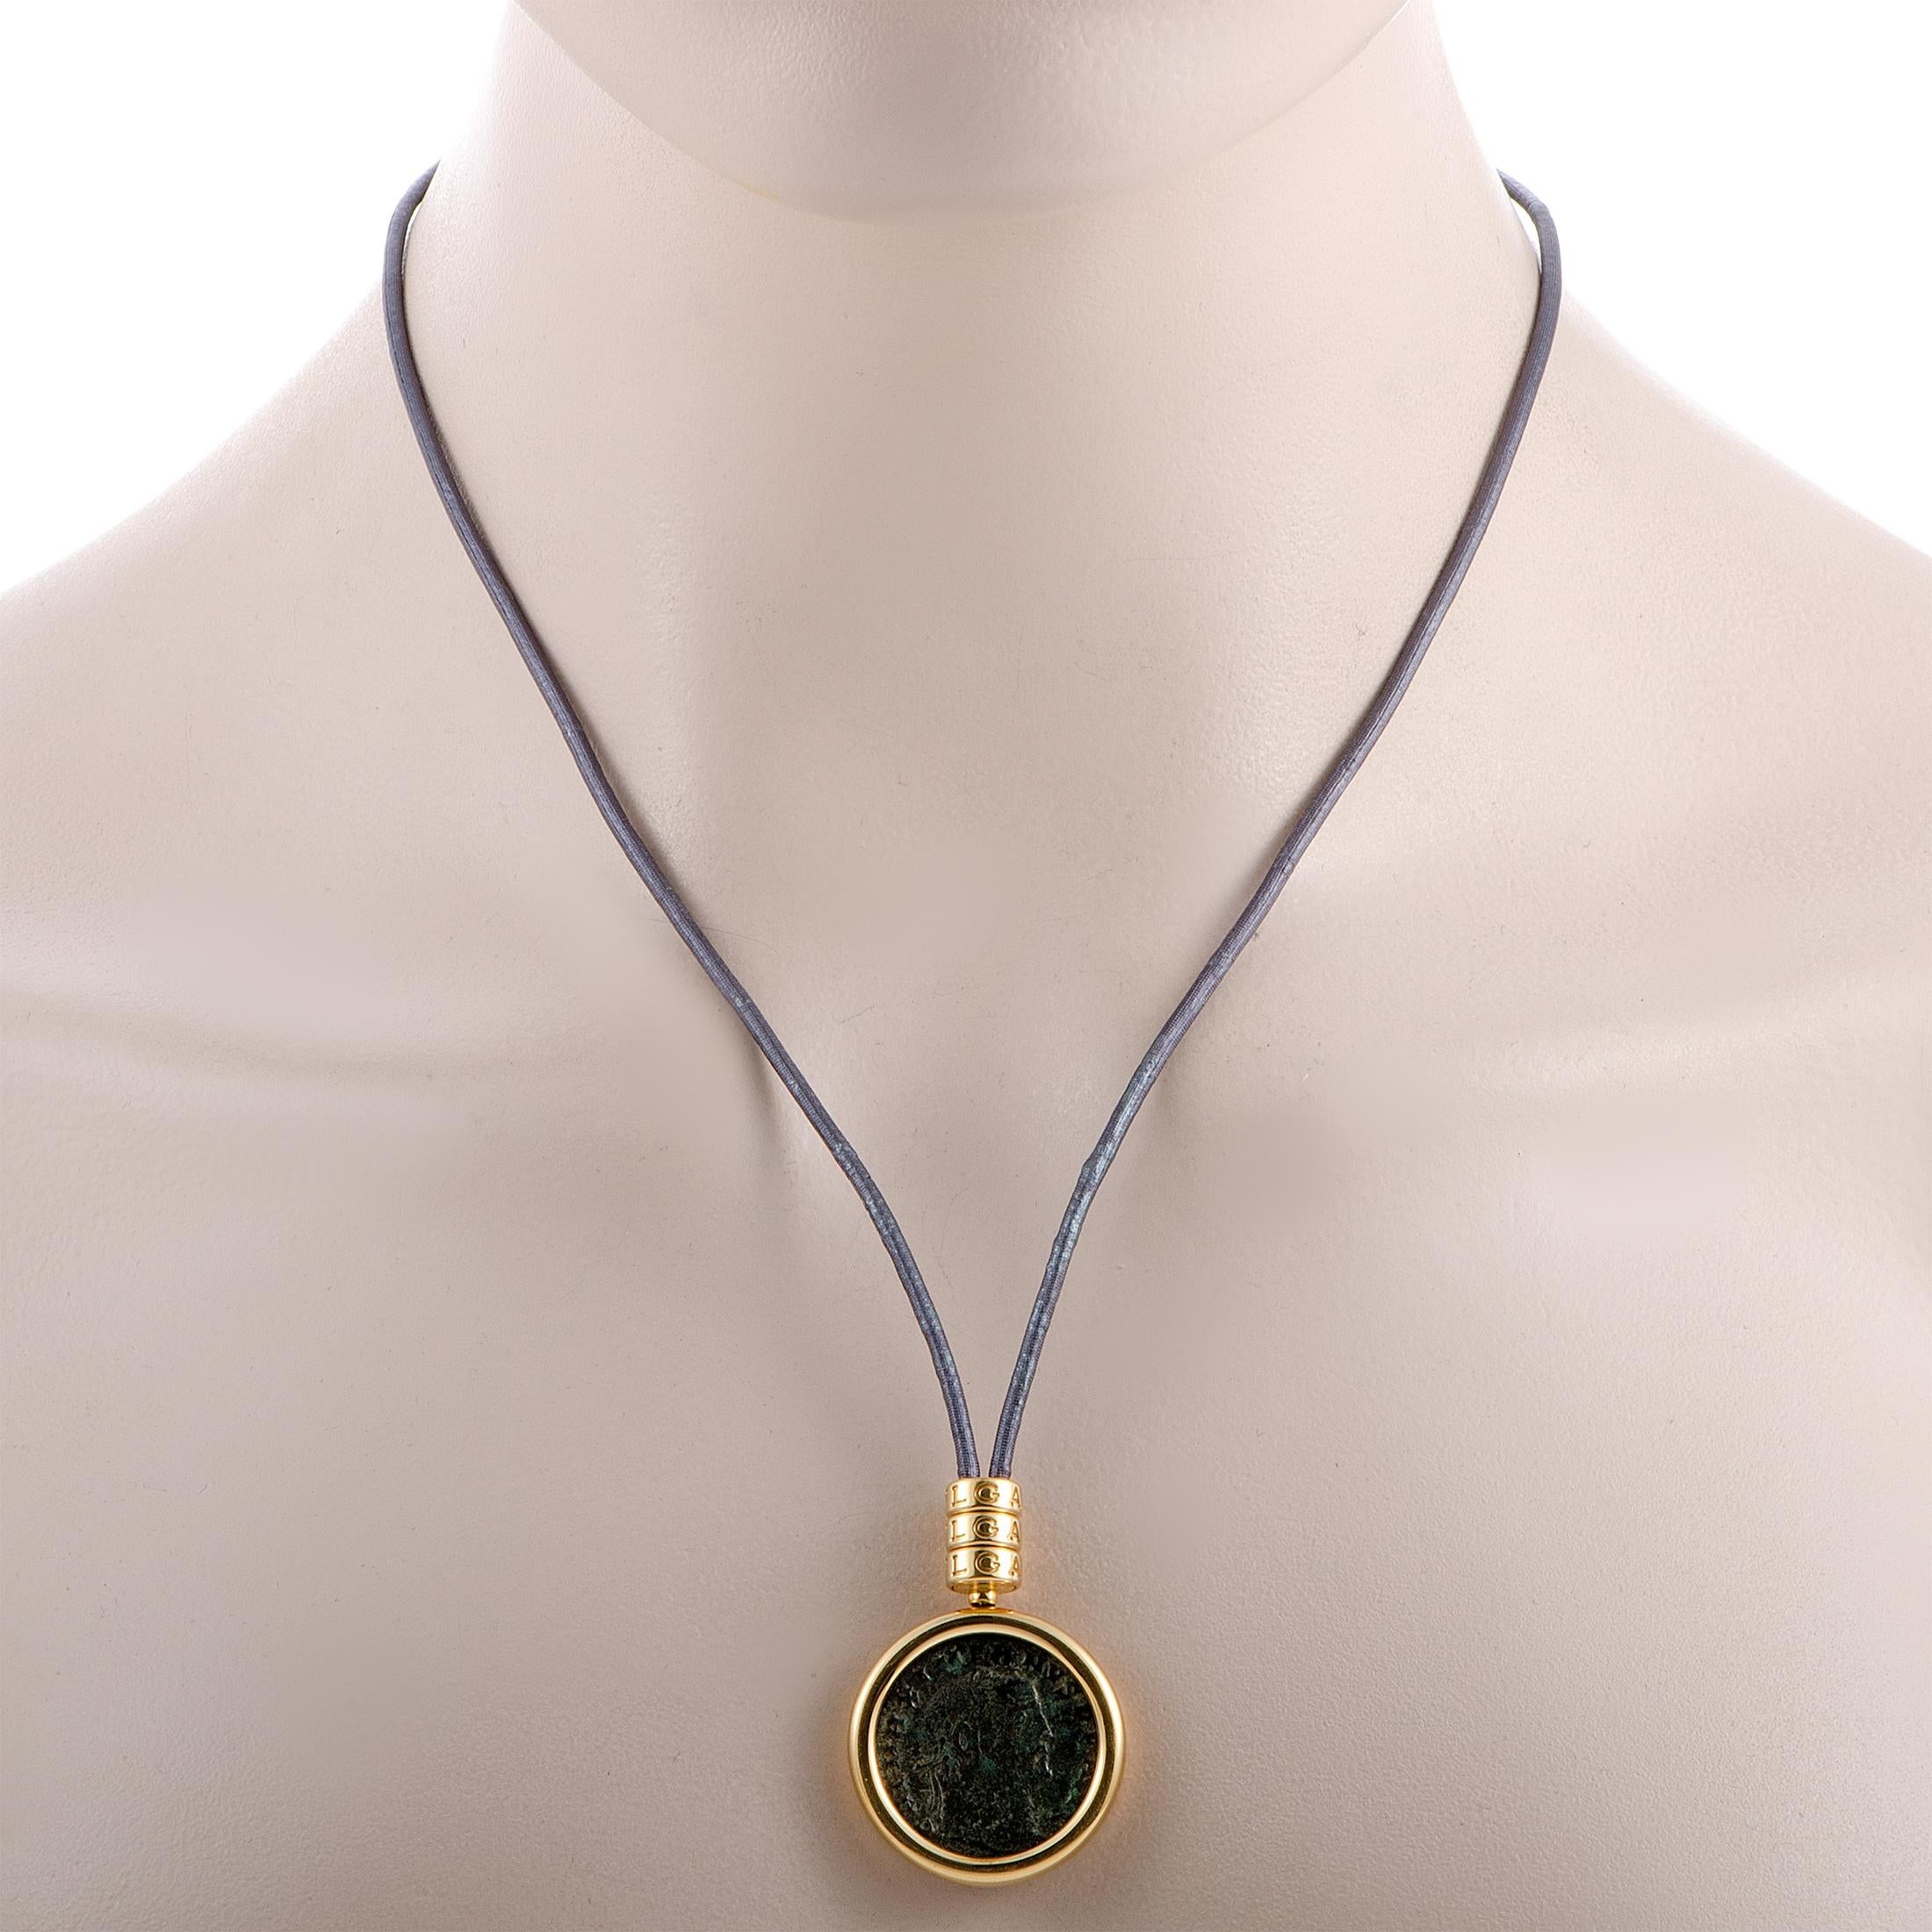 The Bvlgari “Monete” necklace is presented with a 25” cord onto which a 1.55” by 1.15” pendant is attached – set with an antique coin. The necklace weighs 25.8 grams.

This jewelry piece is offered in estate condition and includes the manufacturer’s